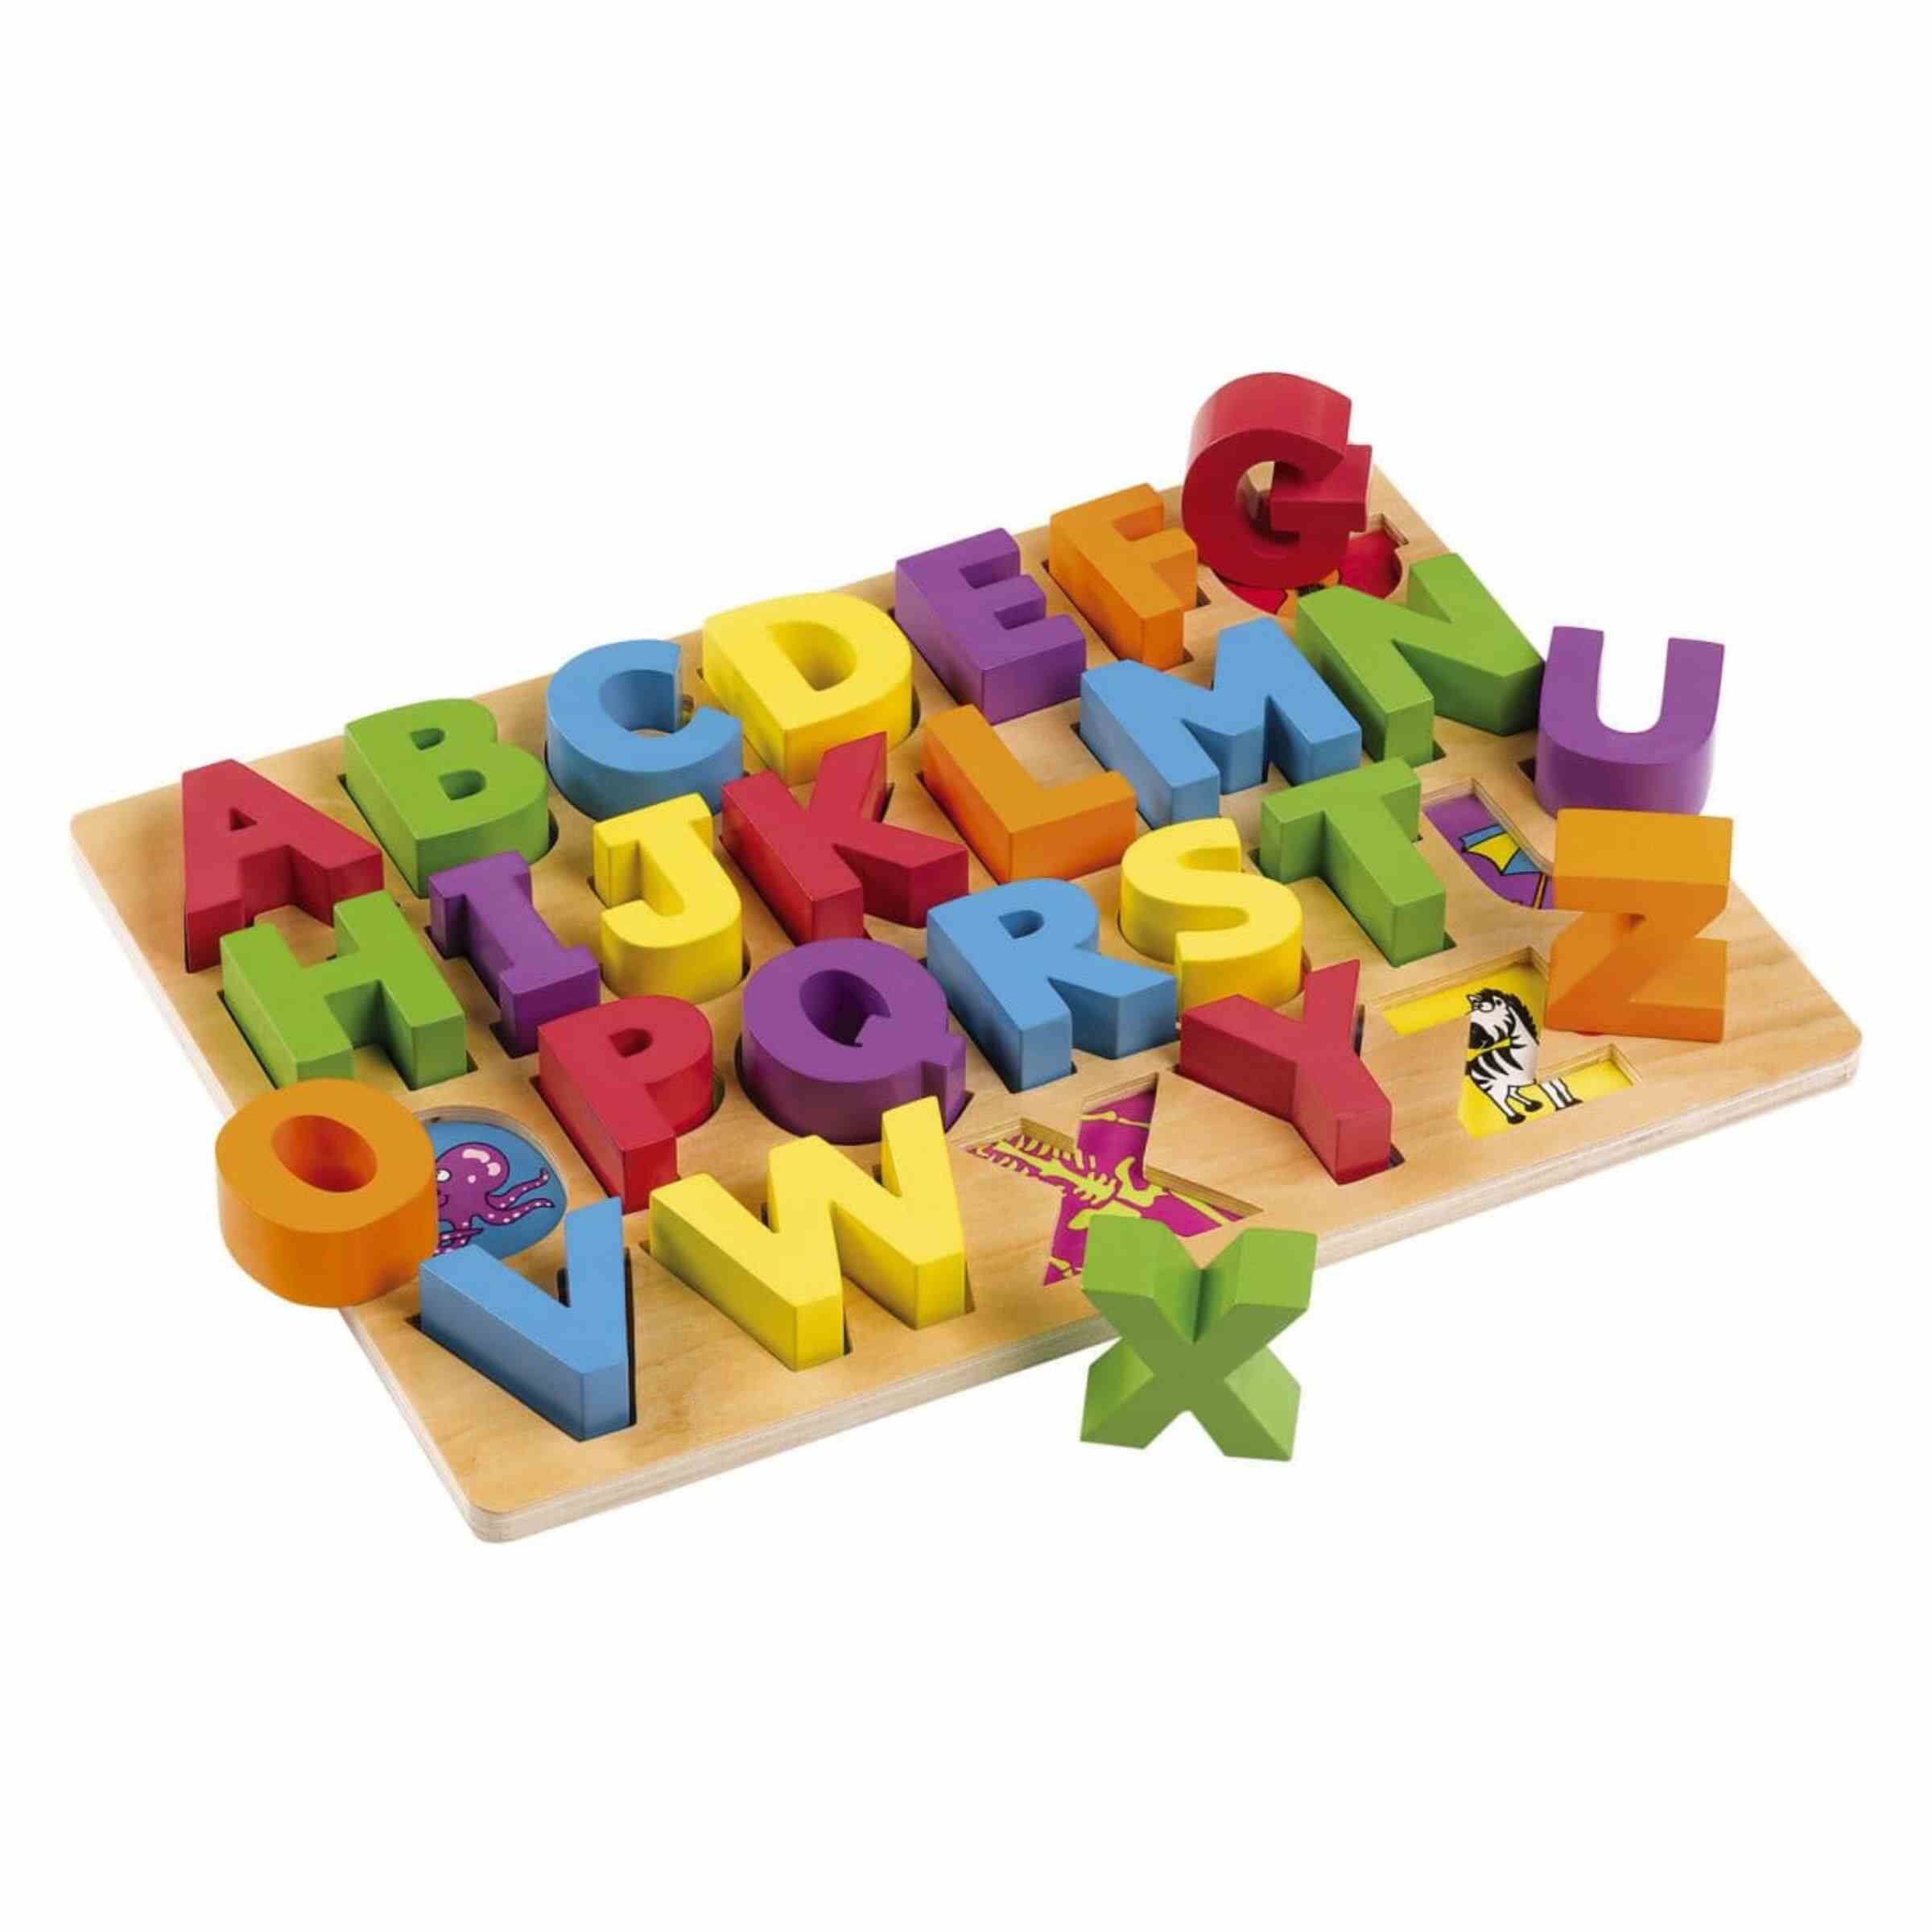 Wooden Toy # (723) 133 (Abc)